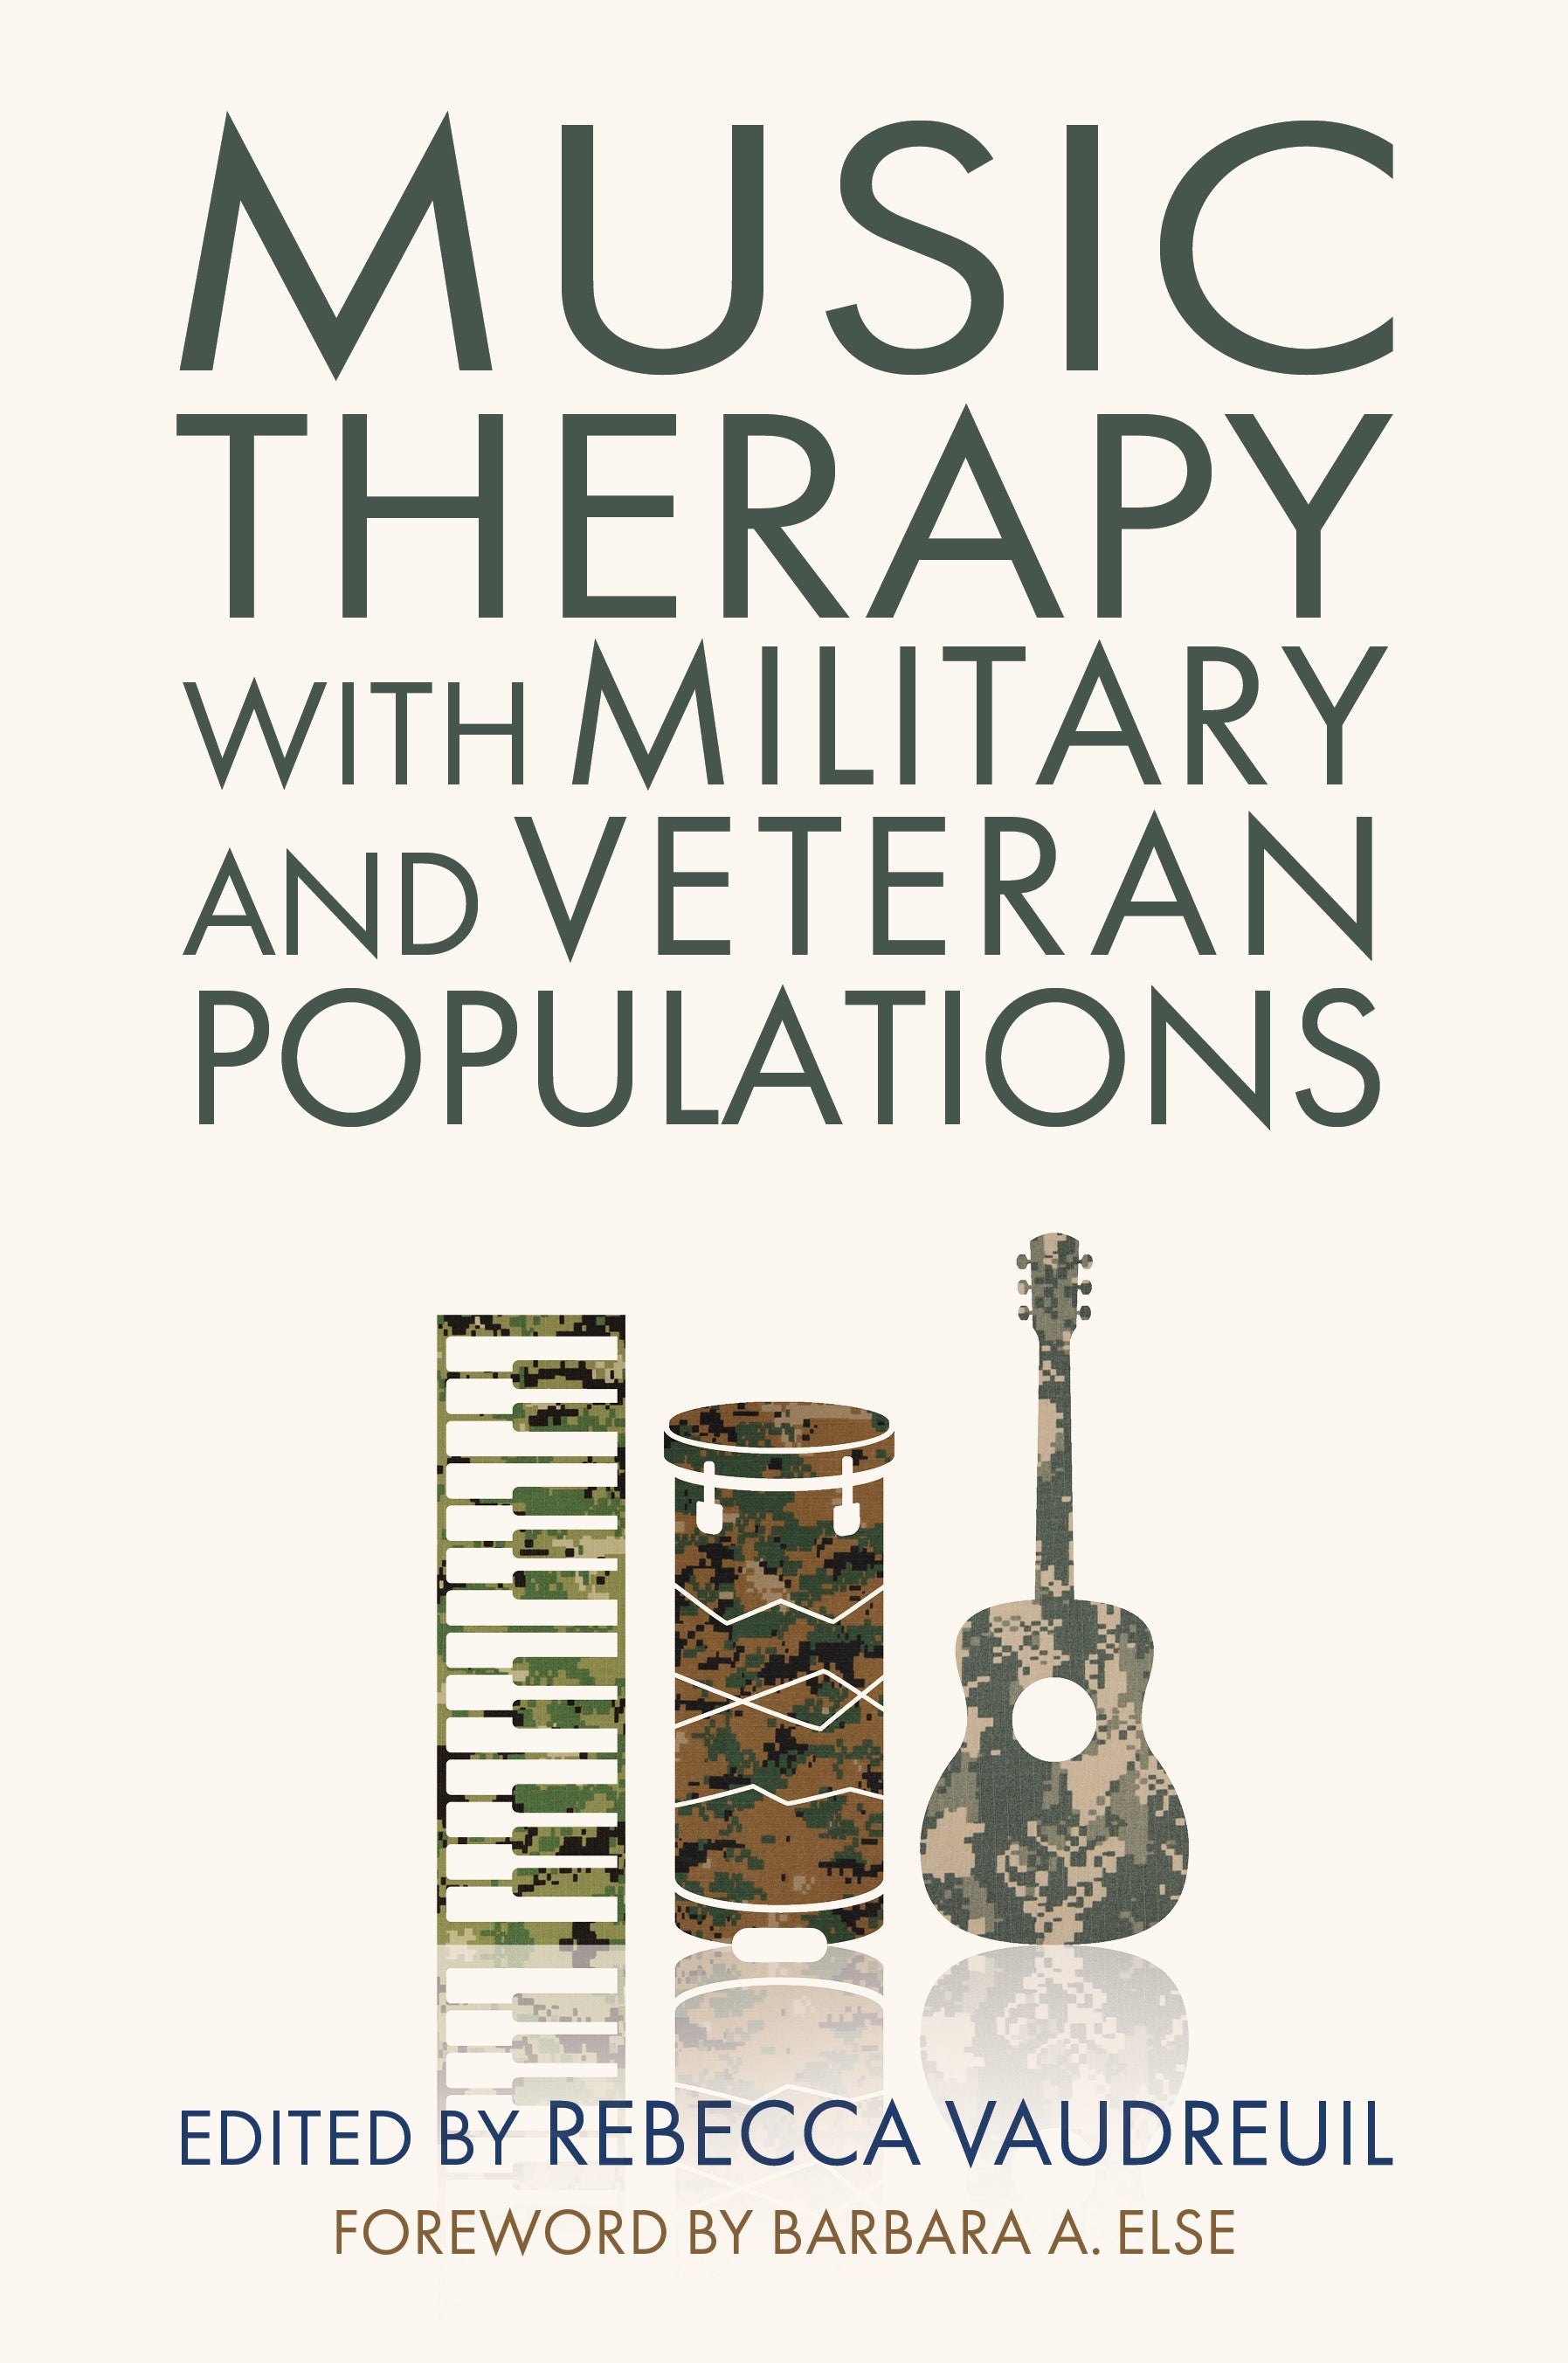 Music Therapy with Military and Veteran Populations by No Author Listed, Rebecca Vaudreuil, Barbara Else